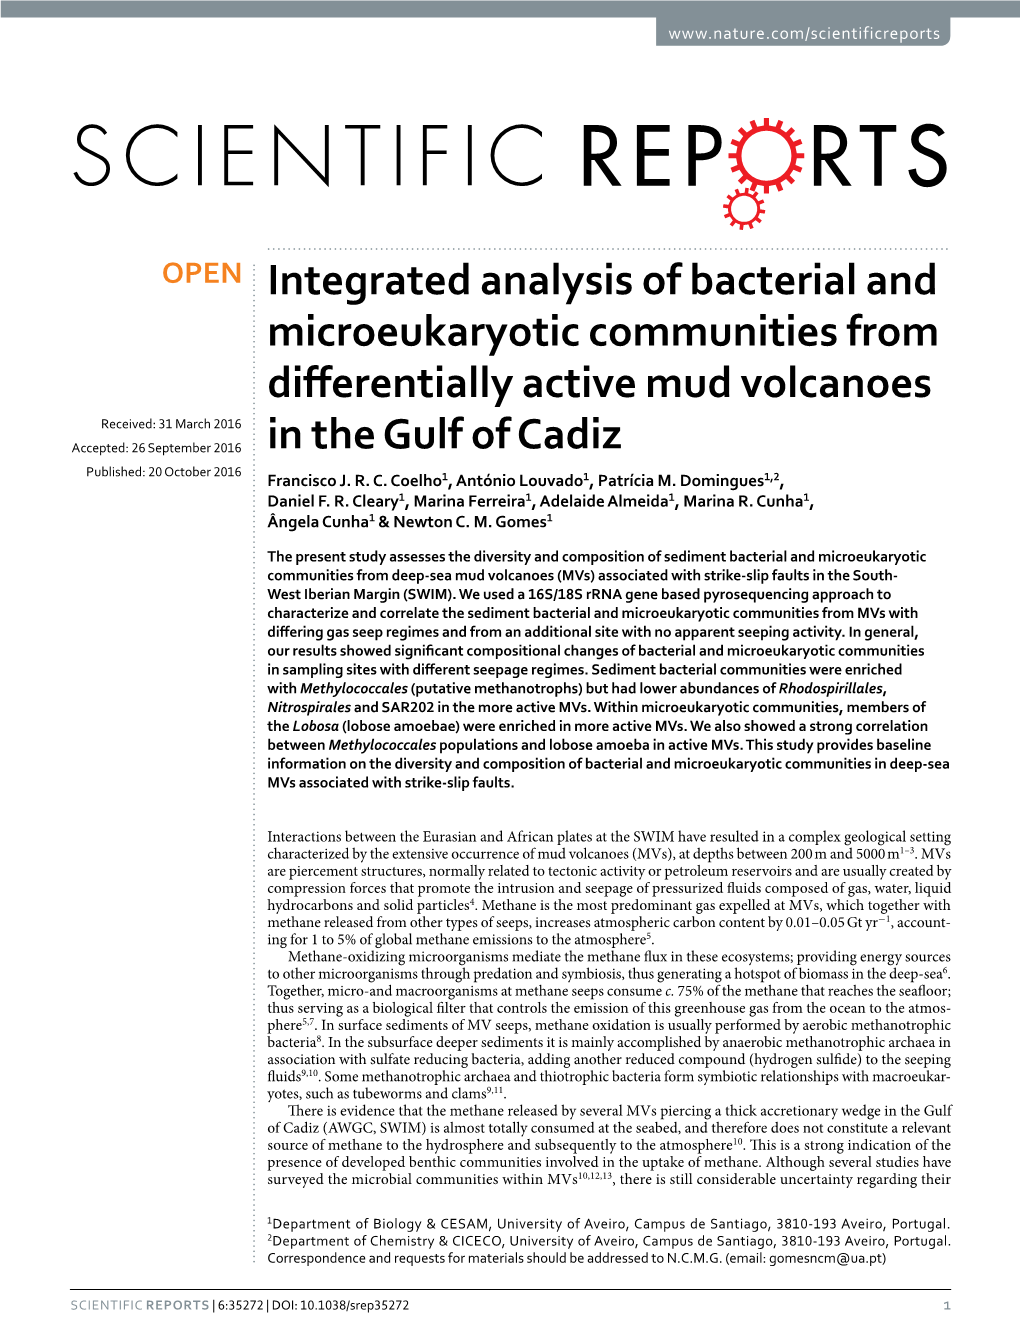 Integrated Analysis of Bacterial and Microeukaryotic Communities From